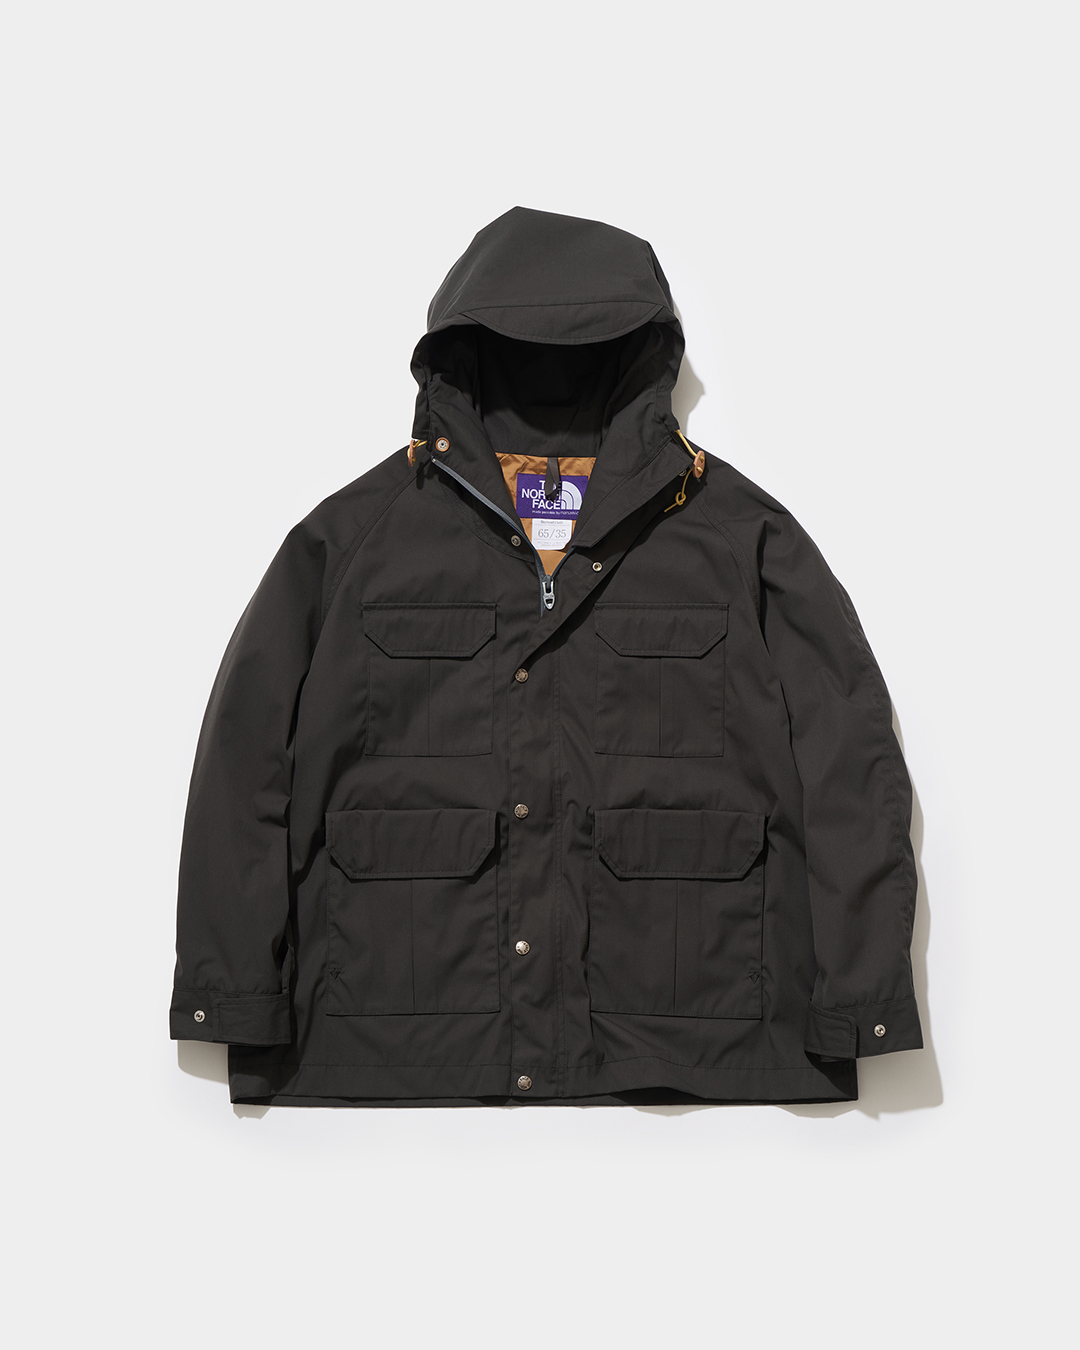 nanamica / THE NORTH FACE PURPLE LABEL / Featured Product vol.20